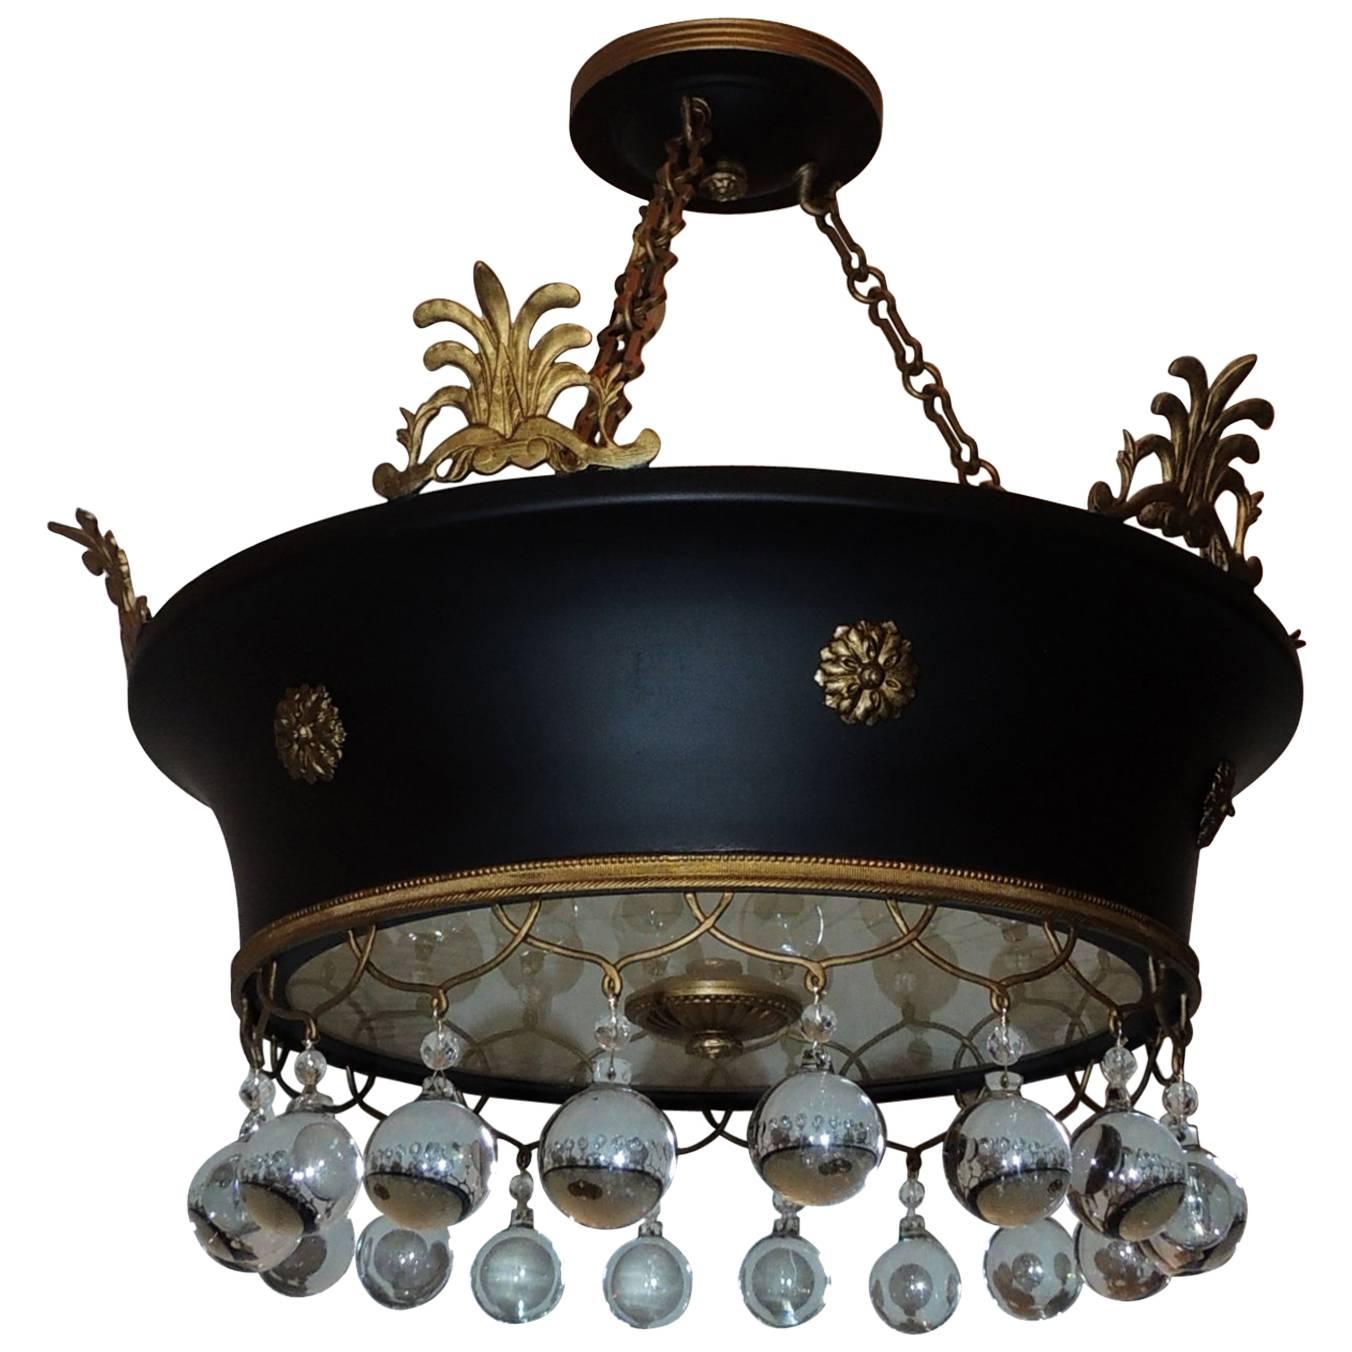 French Empire Doré Bronze Tole Basket Frosted Neoclassical Chandelier Fixture